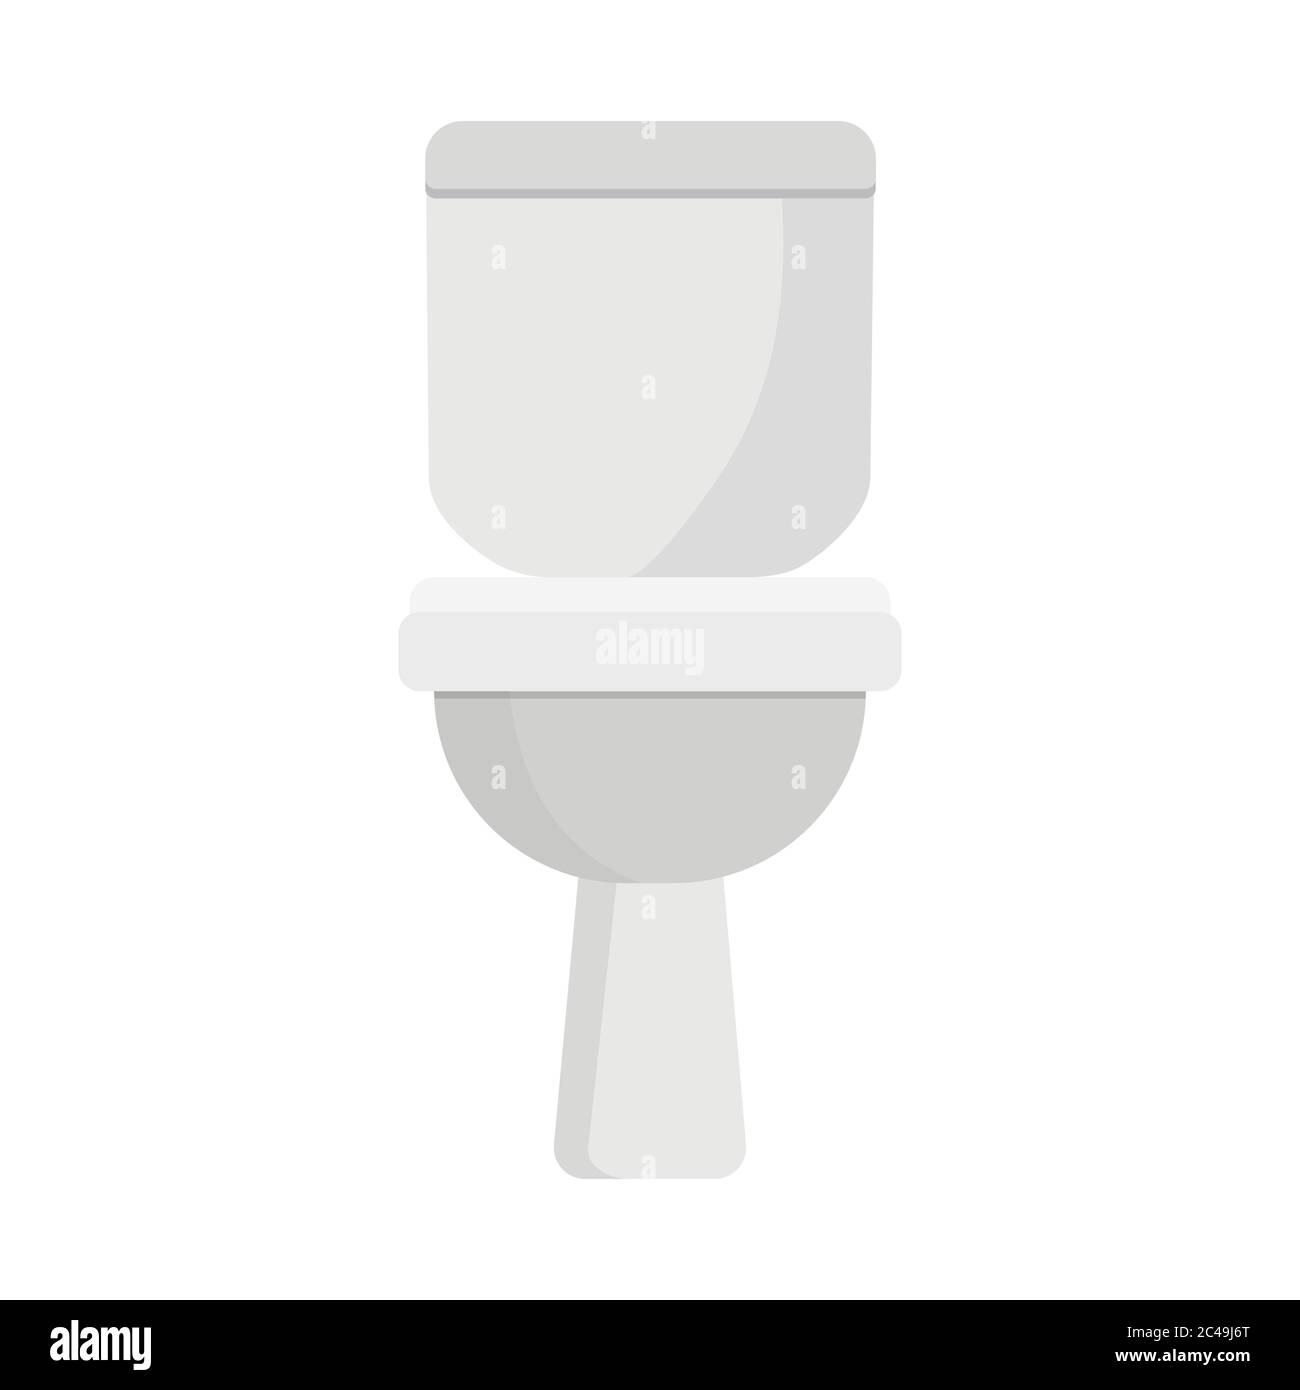 Toilet bowl flat cartoon icon, front and side view. Stock Vector